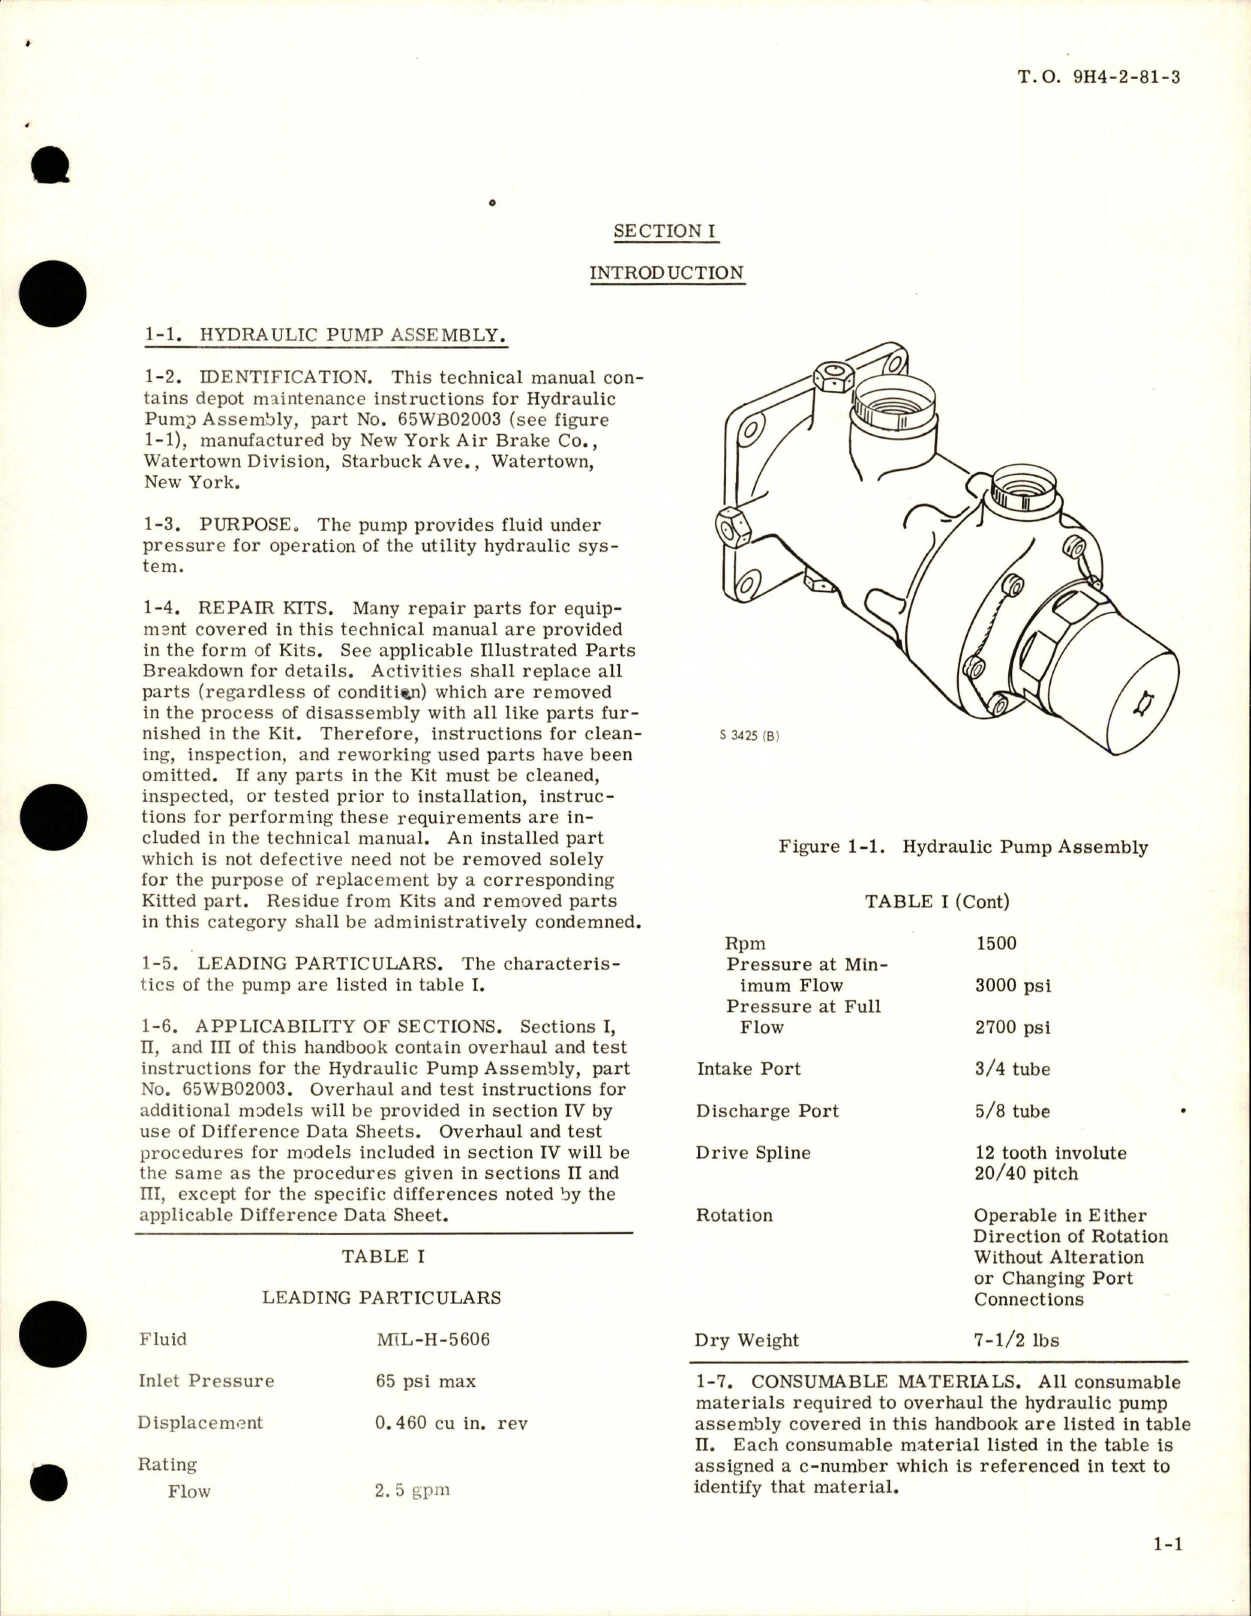 Sample page 5 from AirCorps Library document: Overhaul Manual for Hydraulic Pump Assembly - Part 65WB02003